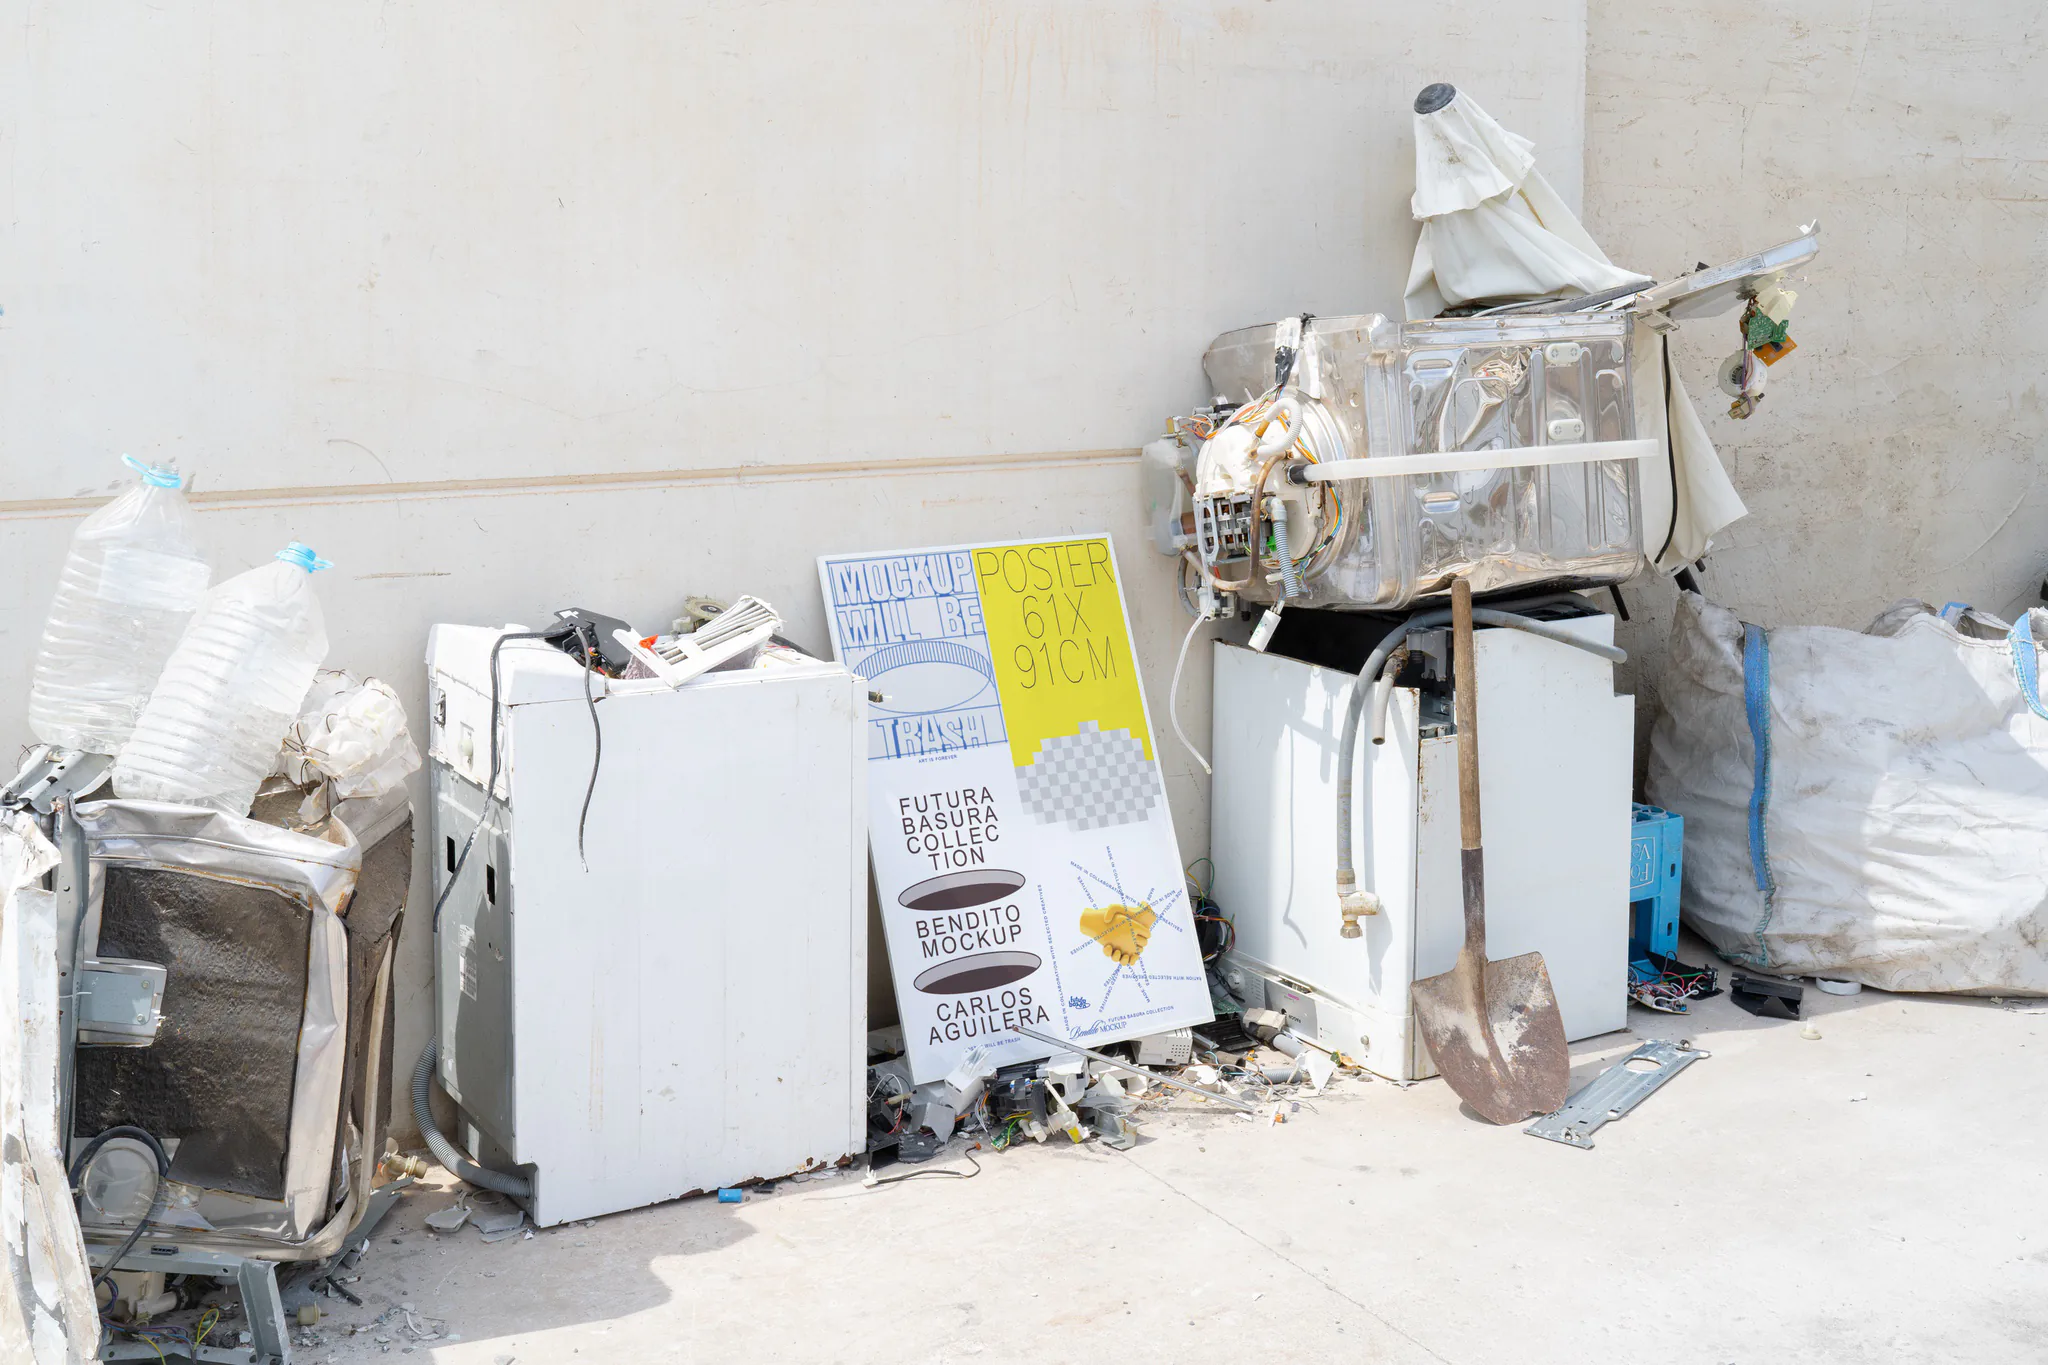 Urban poster mockup surrounded by electronic waste.